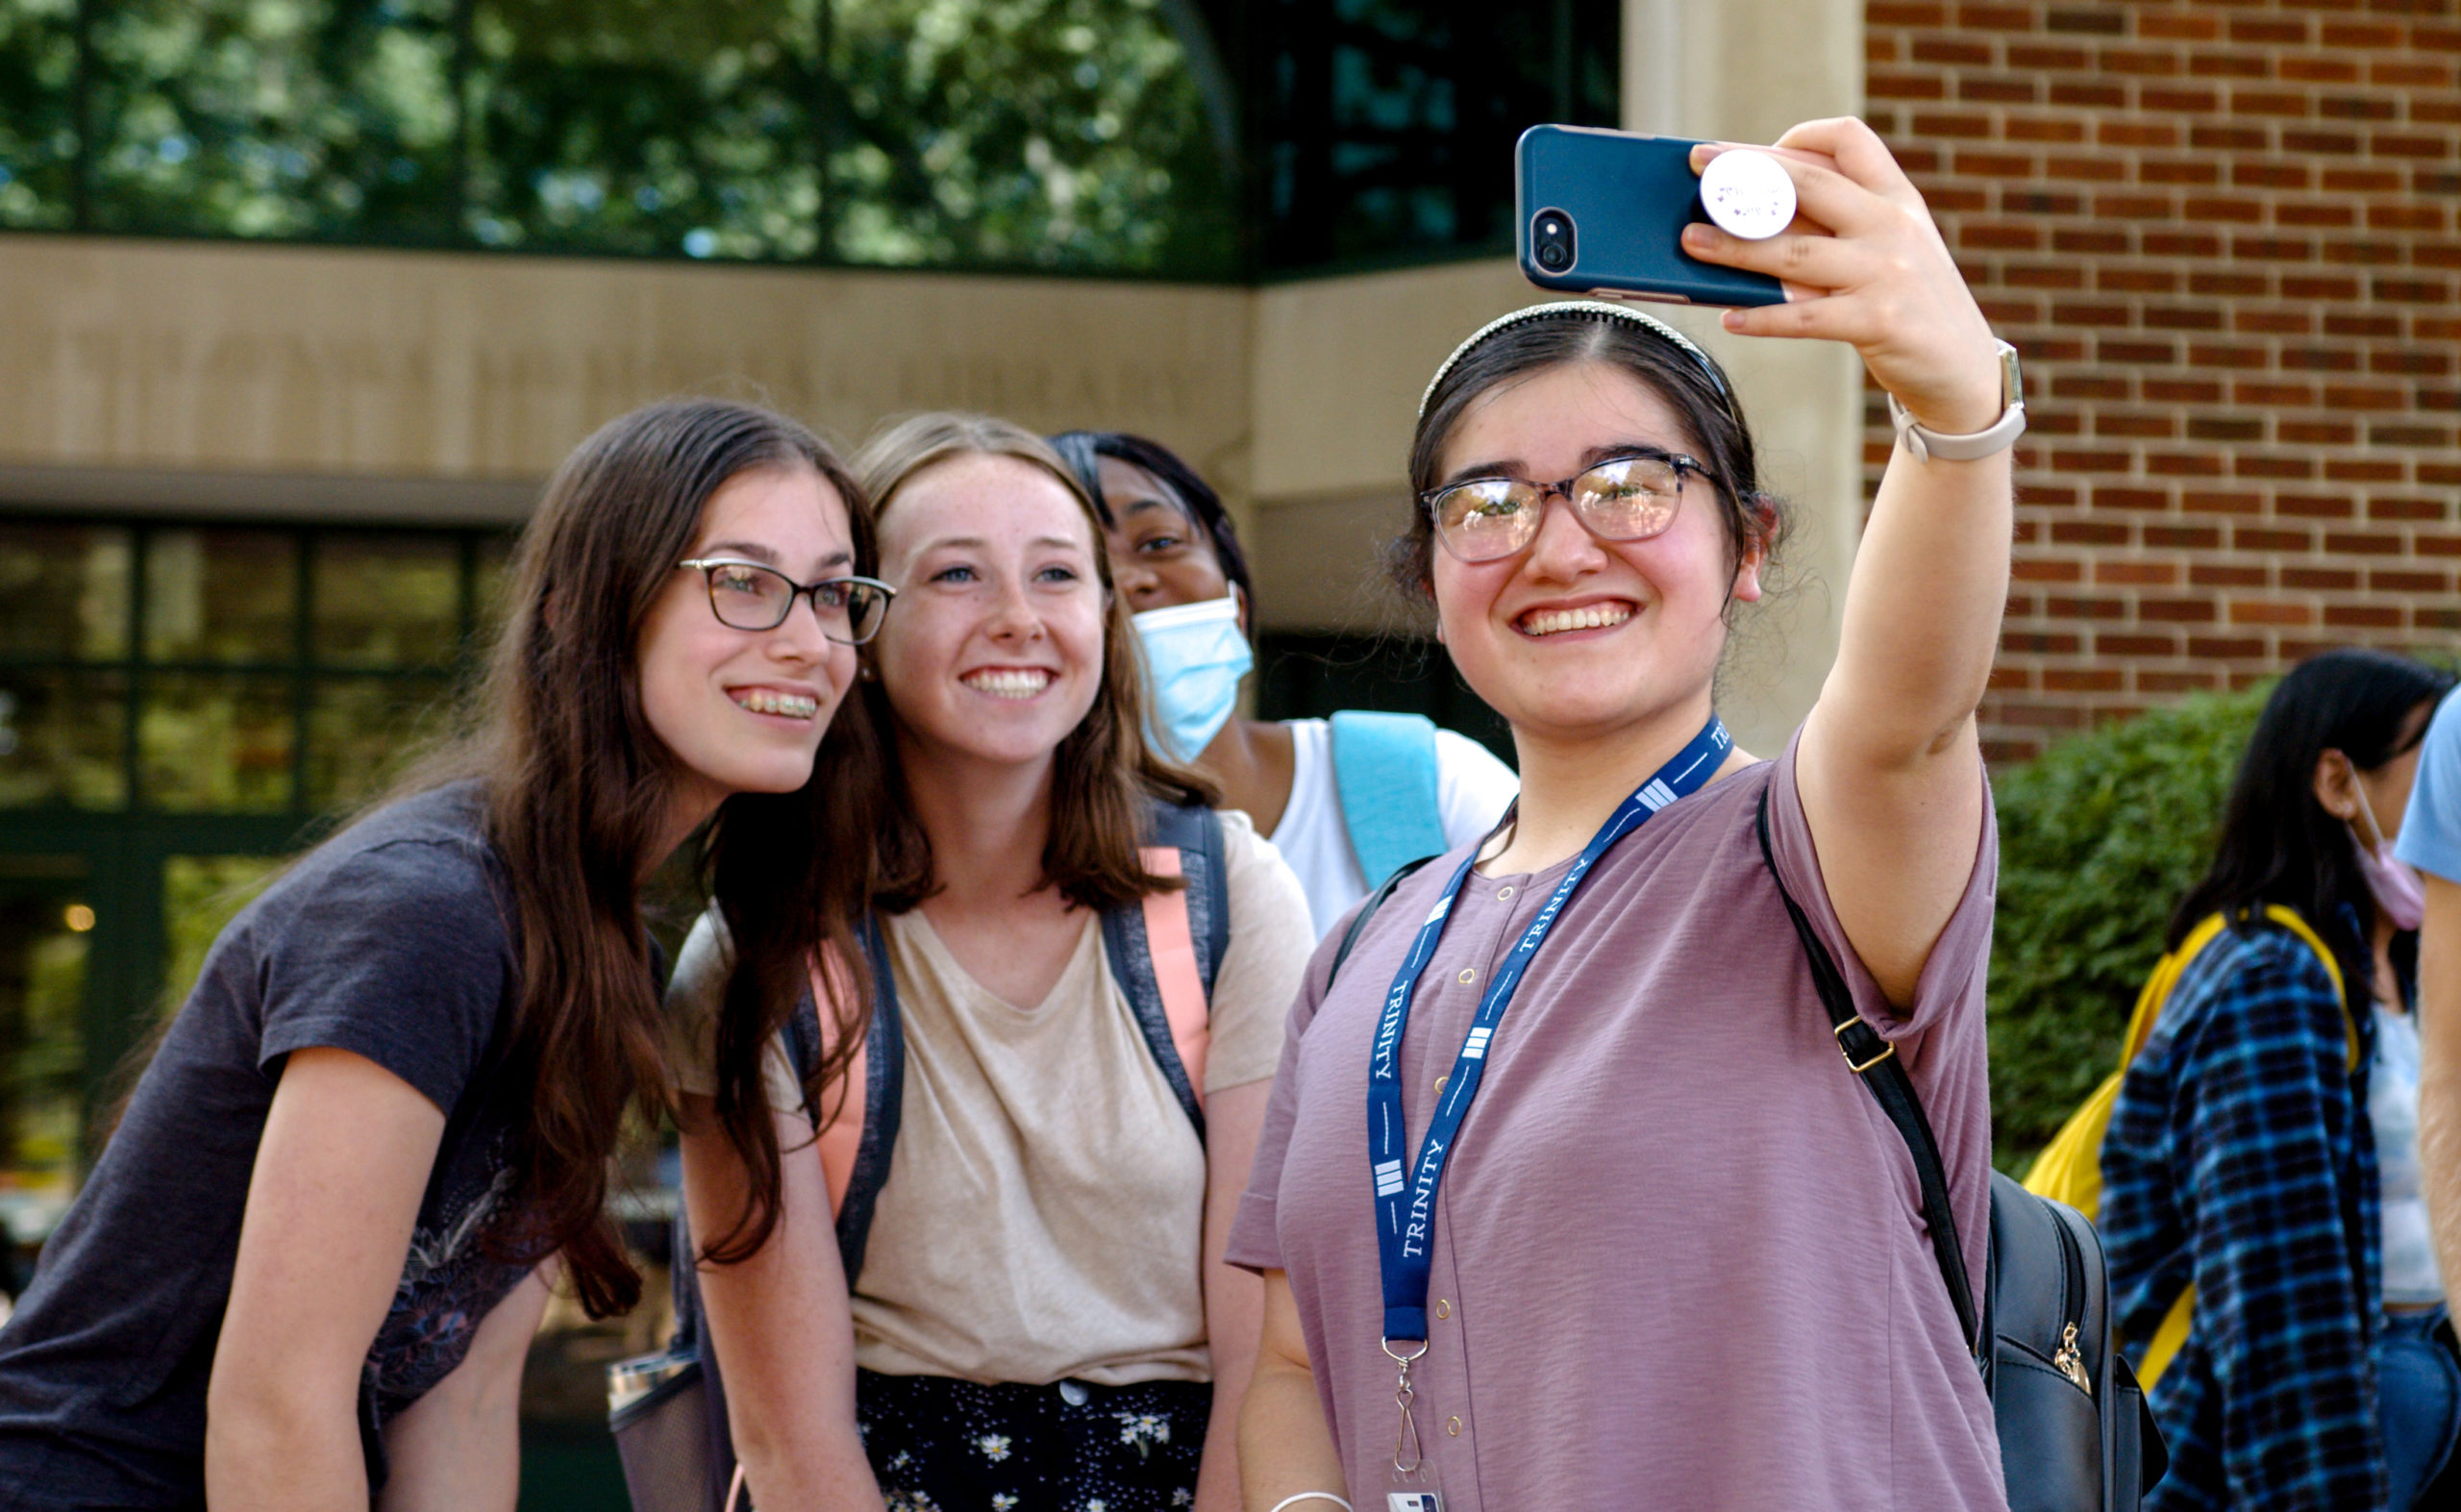 Fall 2021 semester - students taking selfie outside of library on first day of classes